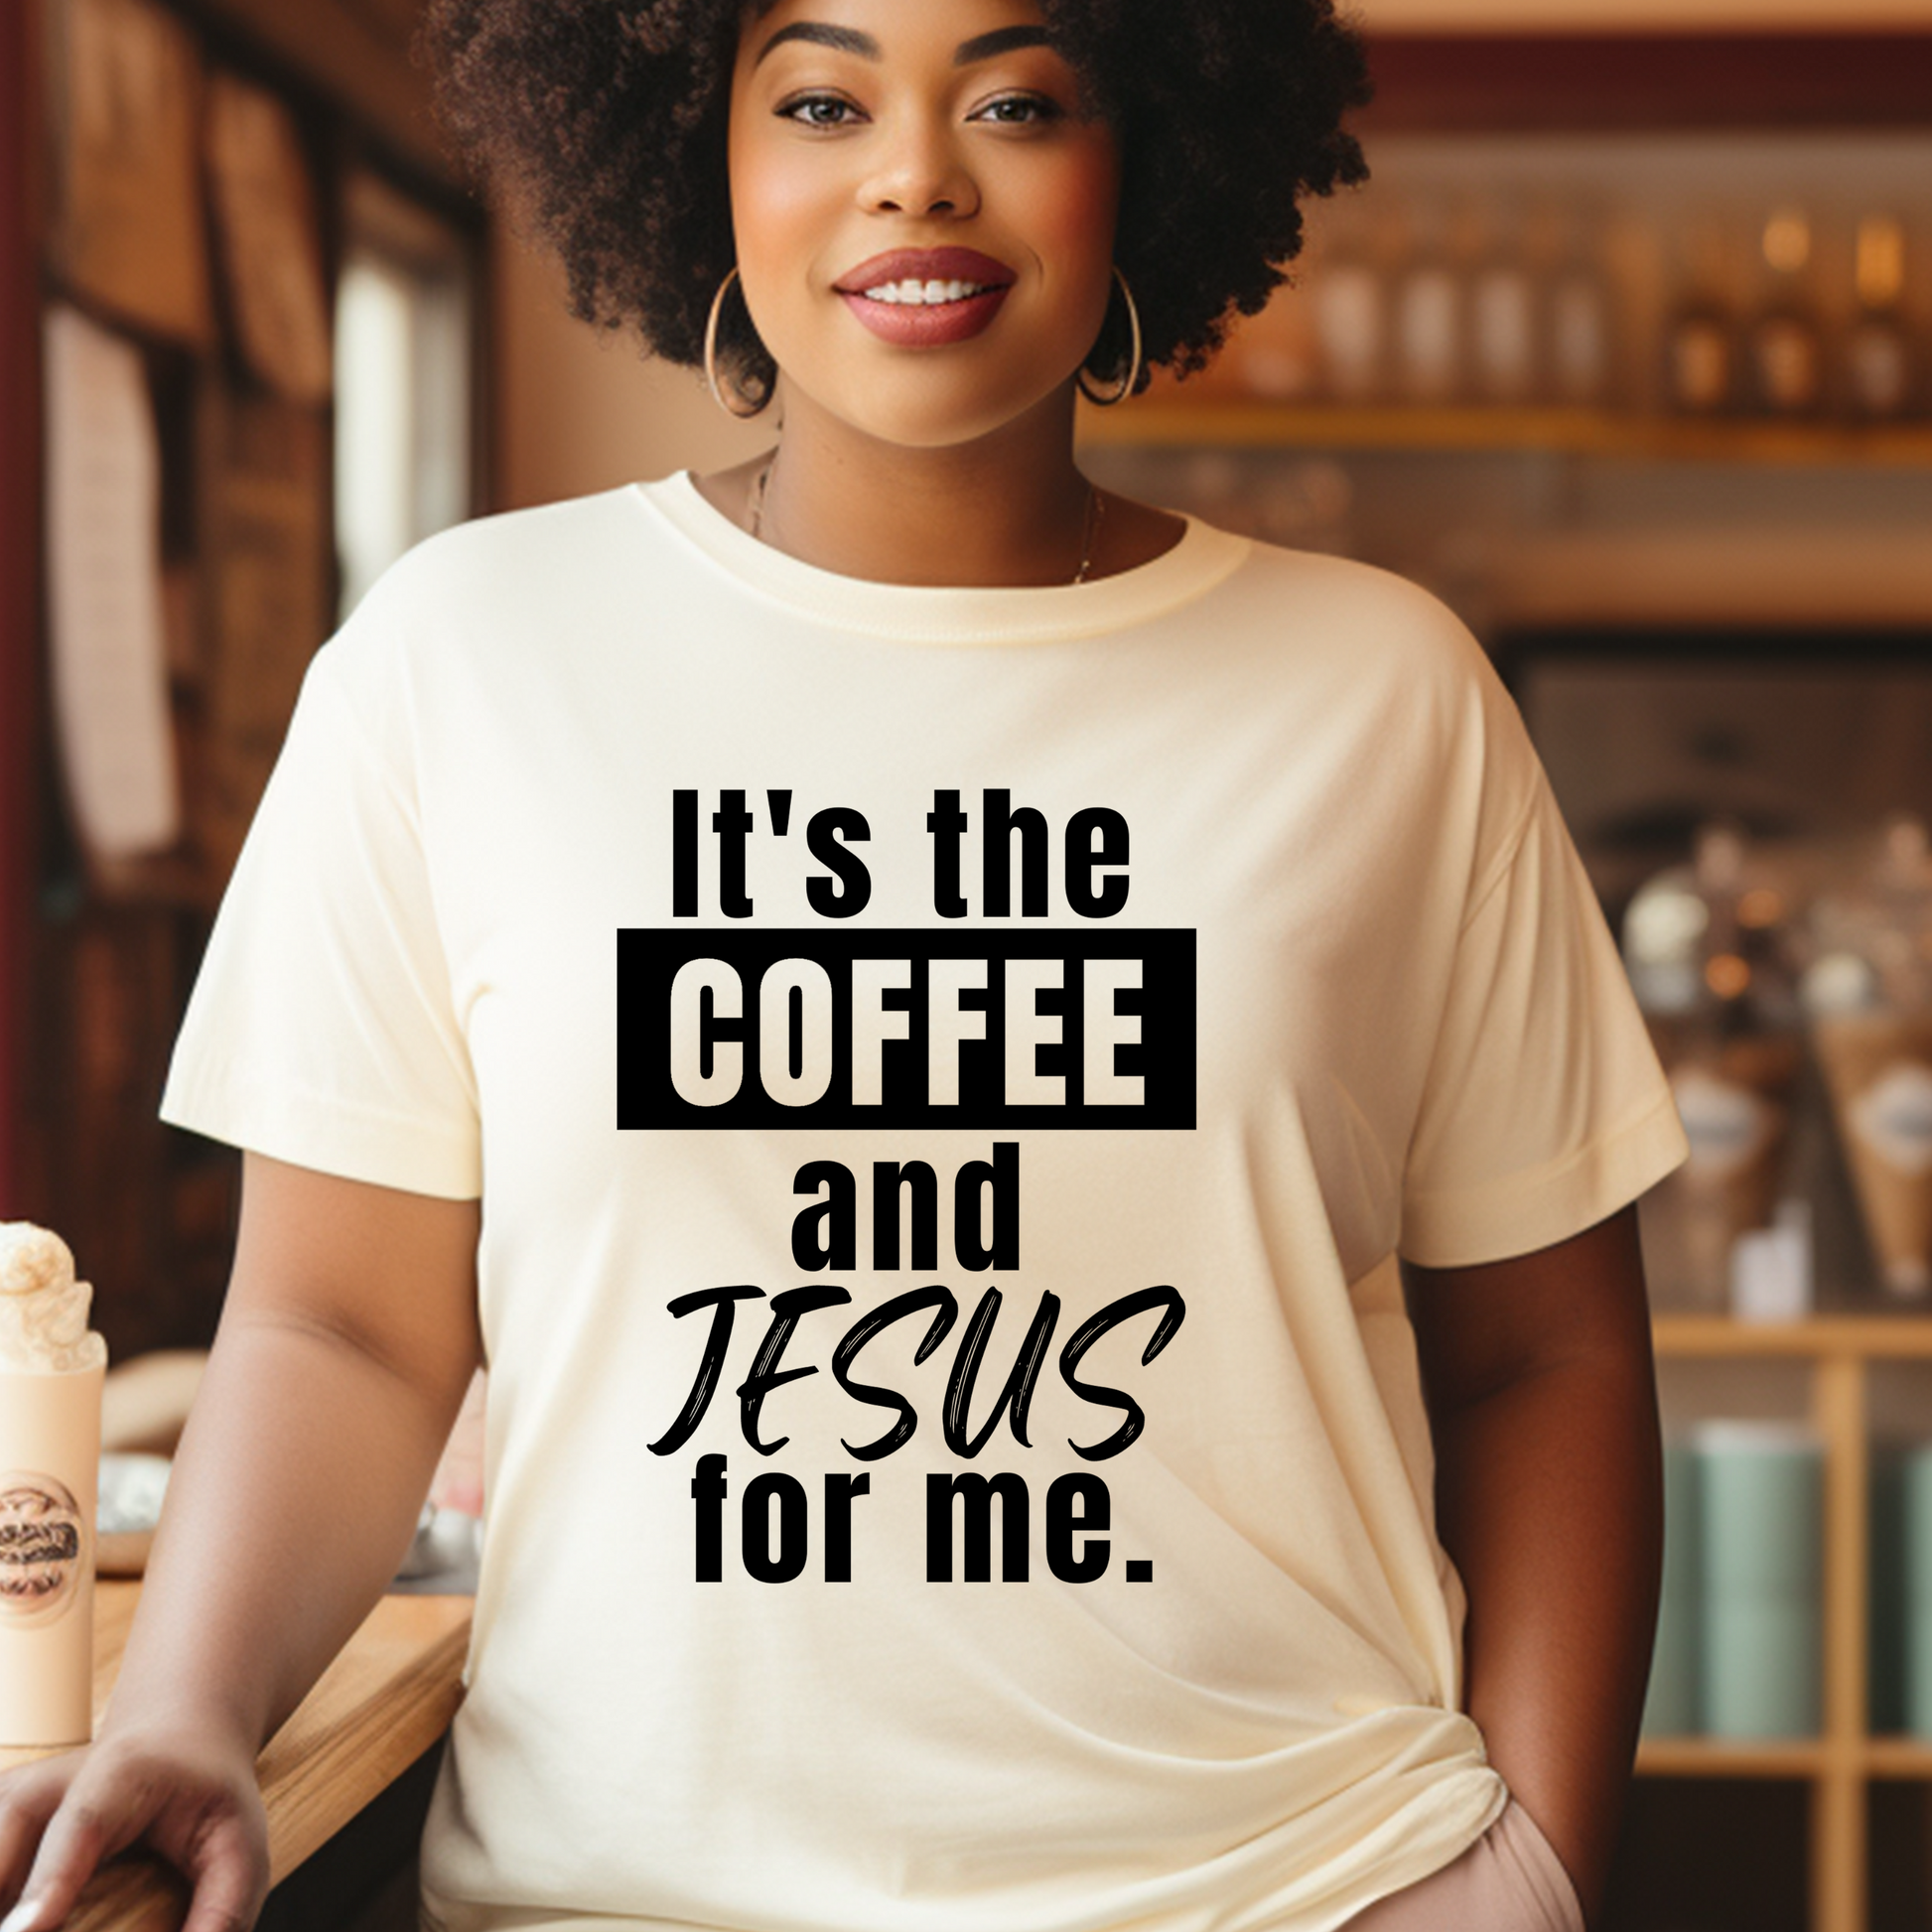 Elegant tan 'It's the Coffee and Jesus for Me' T-shirt from Triumph Tees. Express your faith and love for coffee with this fashionable and comfortable faith apparel.